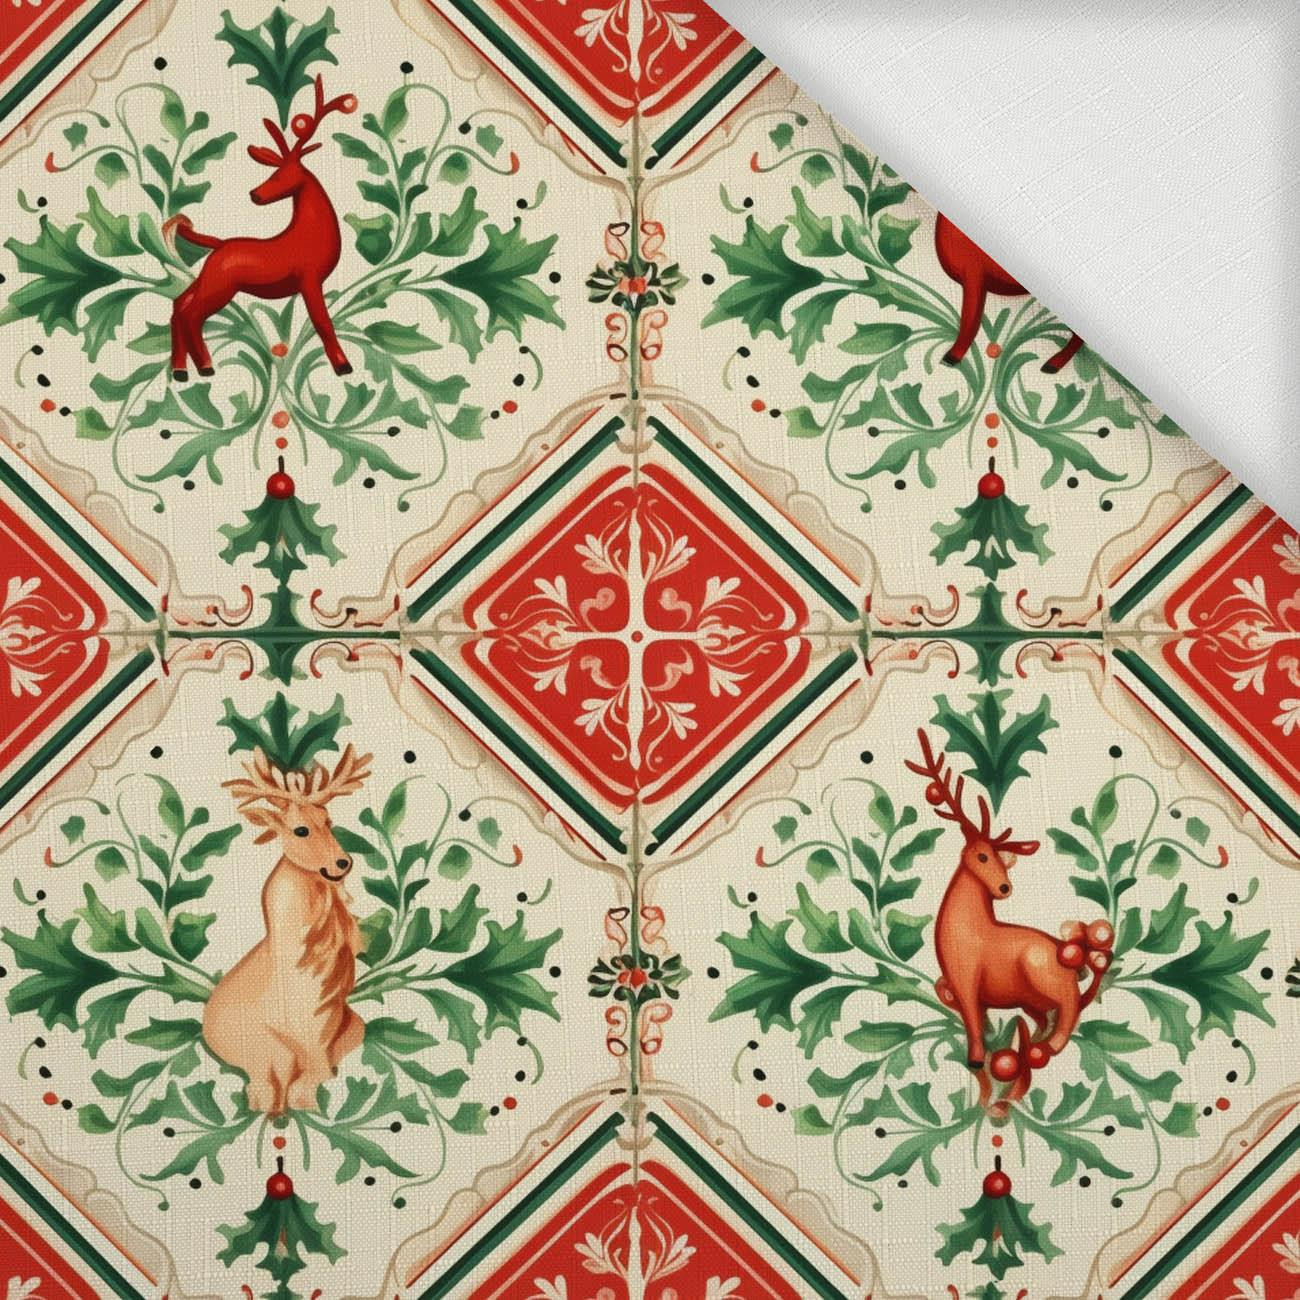 CHRISTMAS DEERS - Woven Fabric for tablecloths